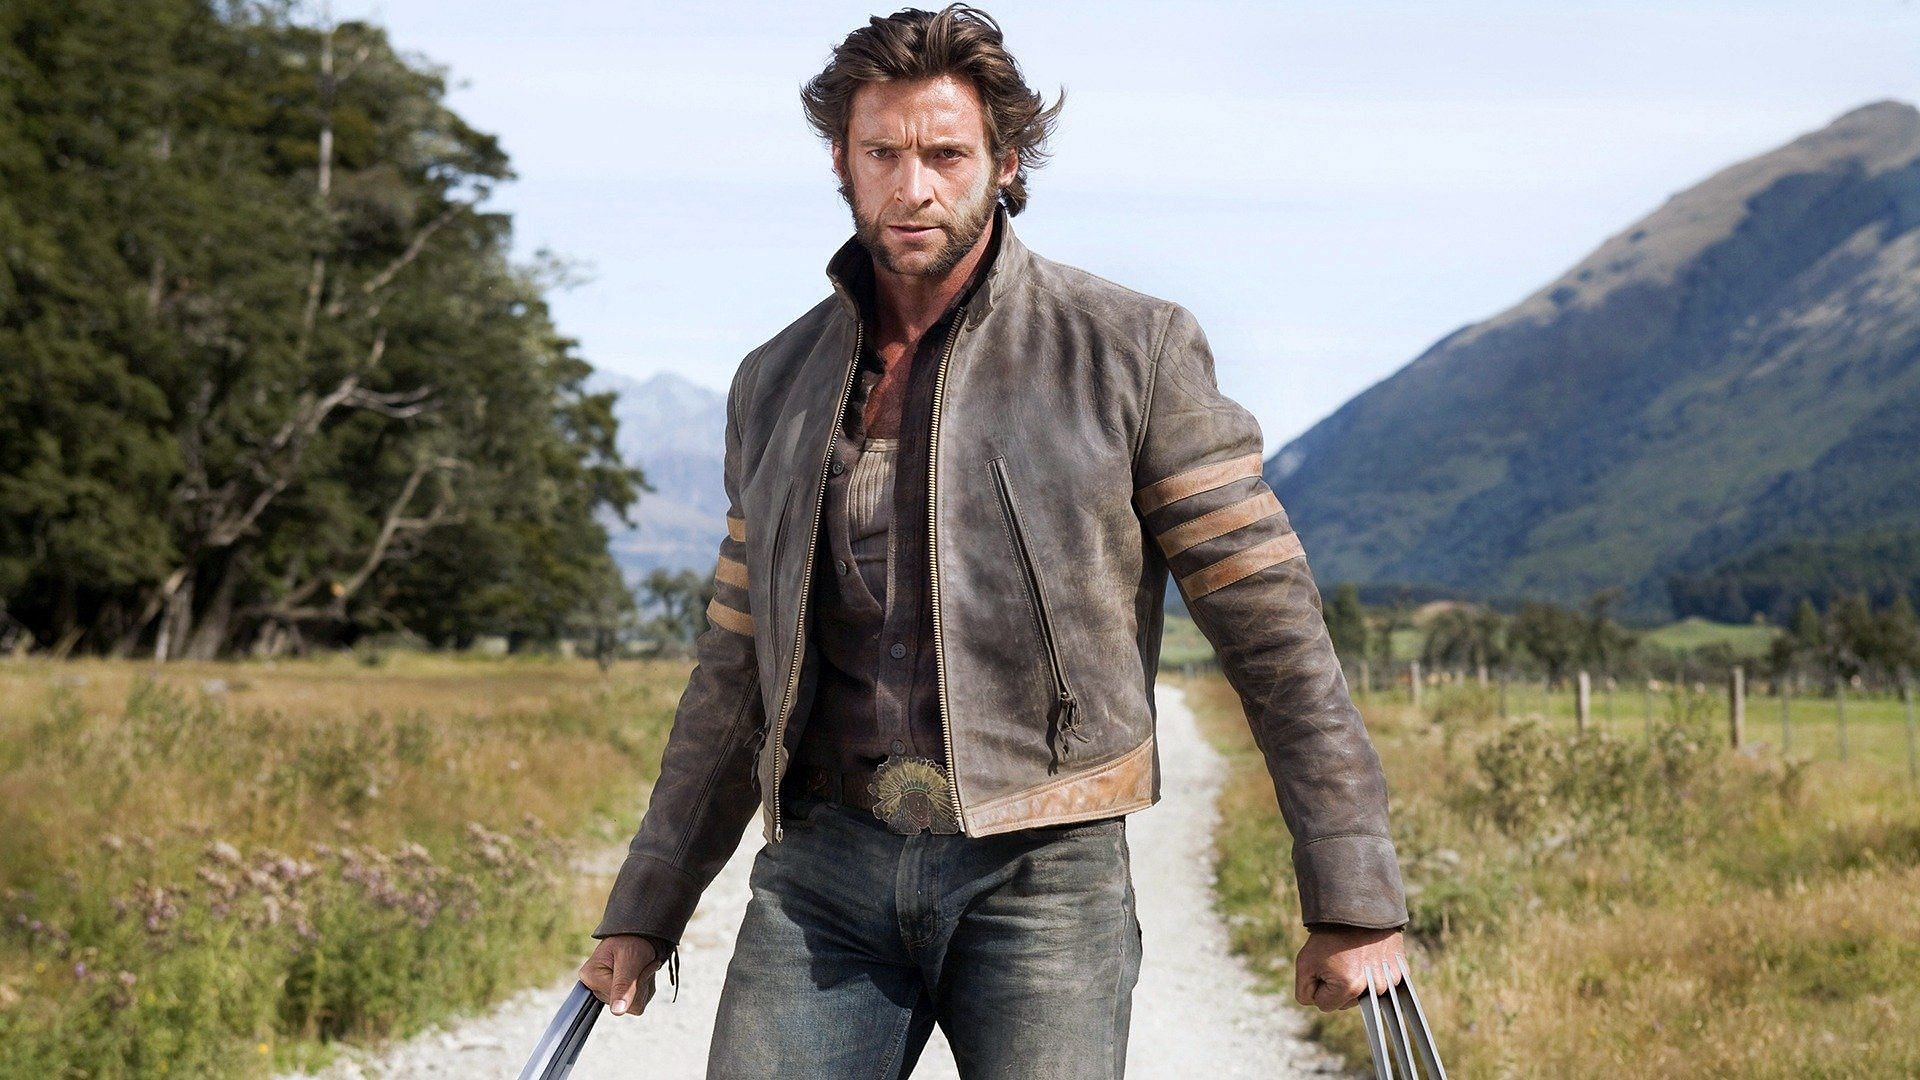 Hugh Jackman stars as Wolverine in this poorly received spinoff that failed to do justice to the iconic character (Image via 20th Century Fox)